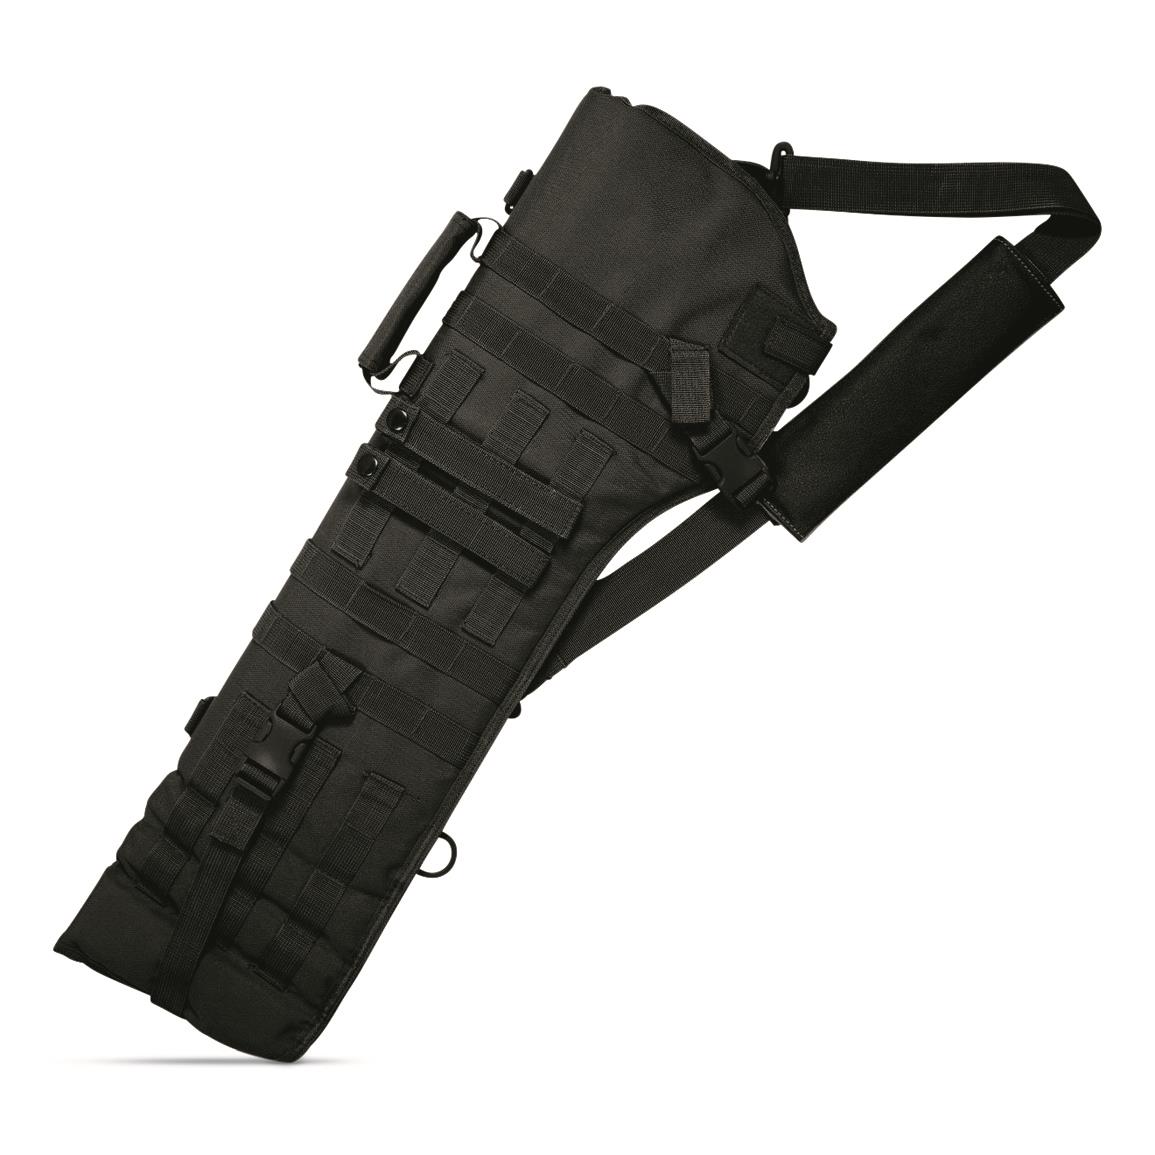 Red Rock Outdoor Gear MOLLE Rifle Scabbard, Black